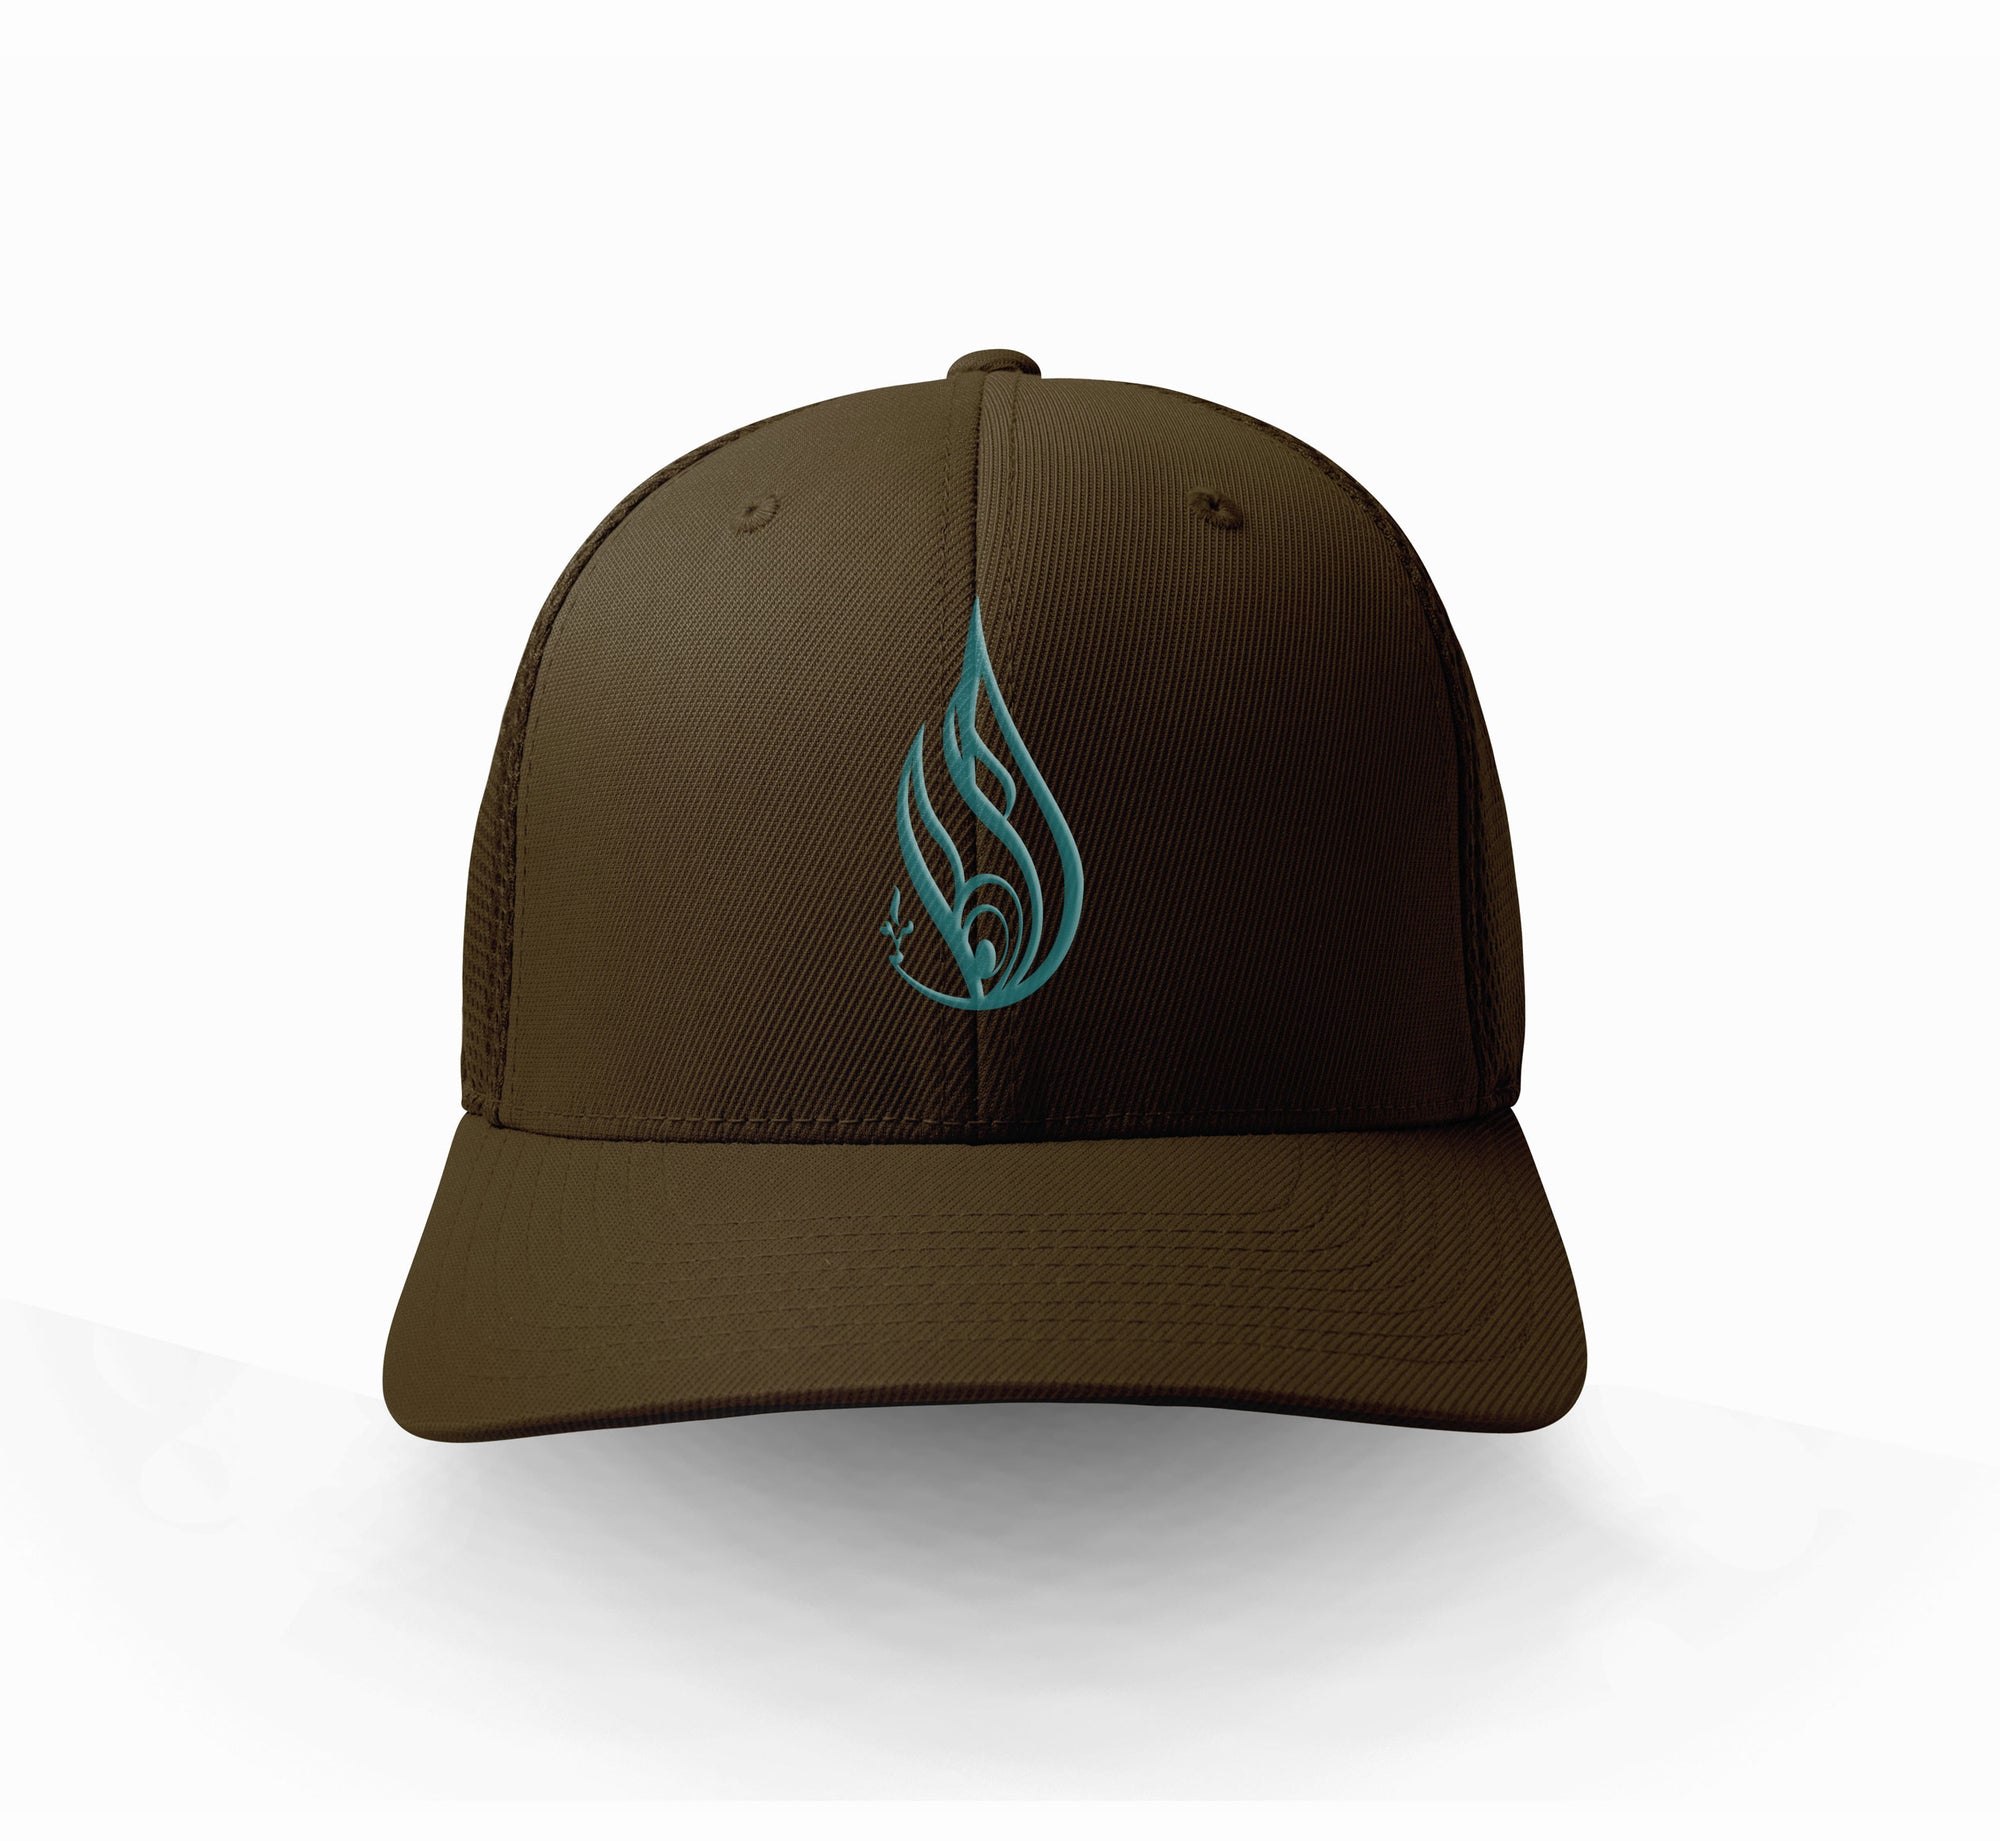 Pathfinder Curved Snapback Hat by Threyda - ships august